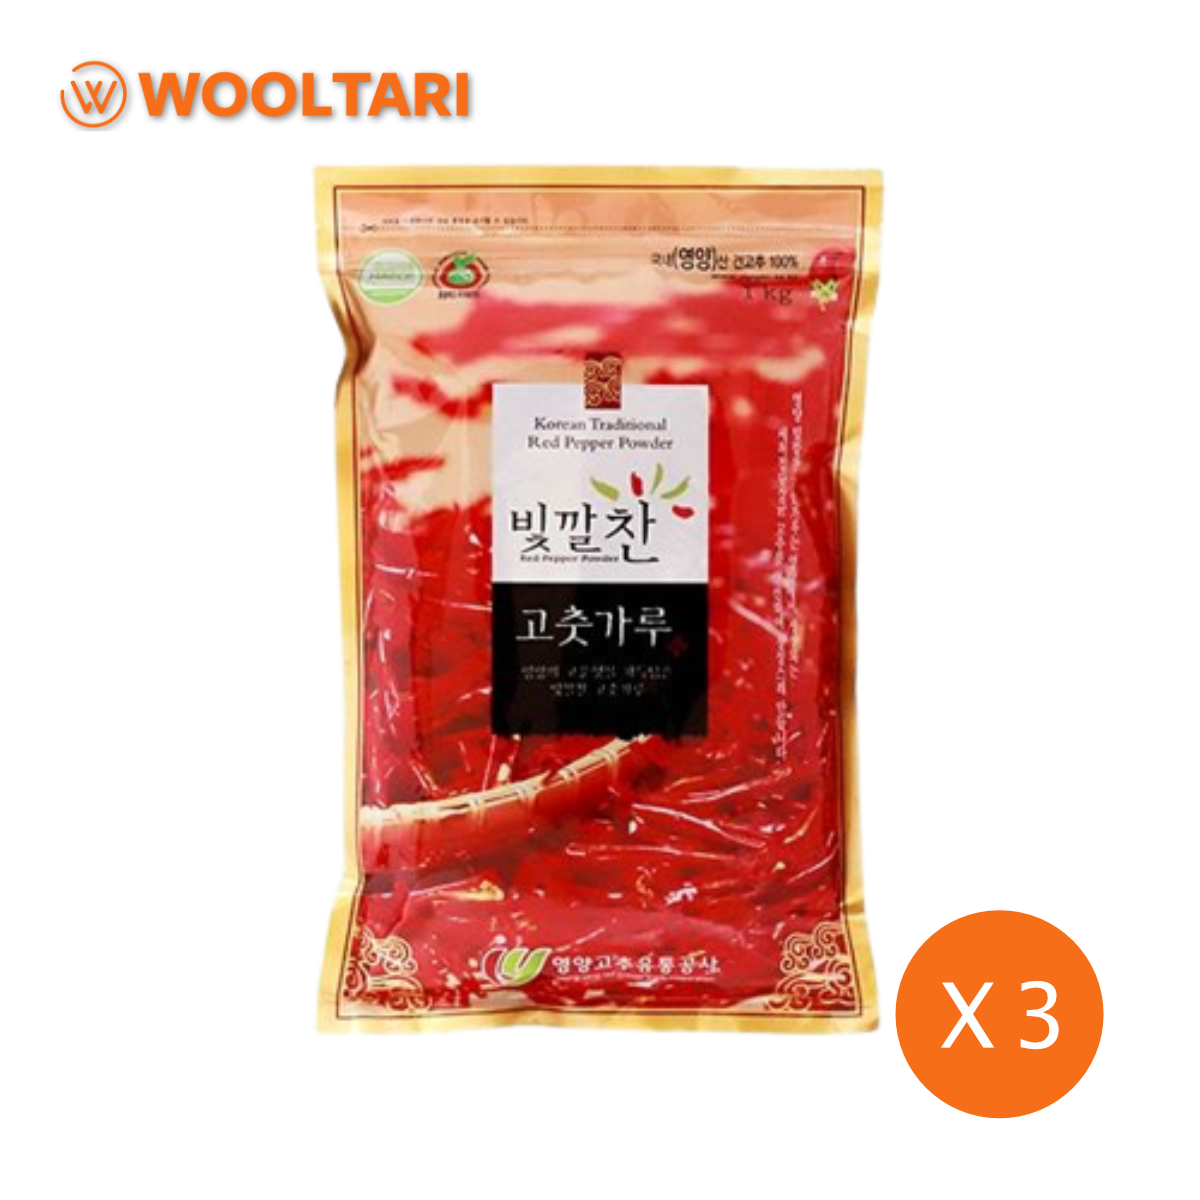 Red pepper powder for kimchi (medium spicy) 1kg X 3pack product image